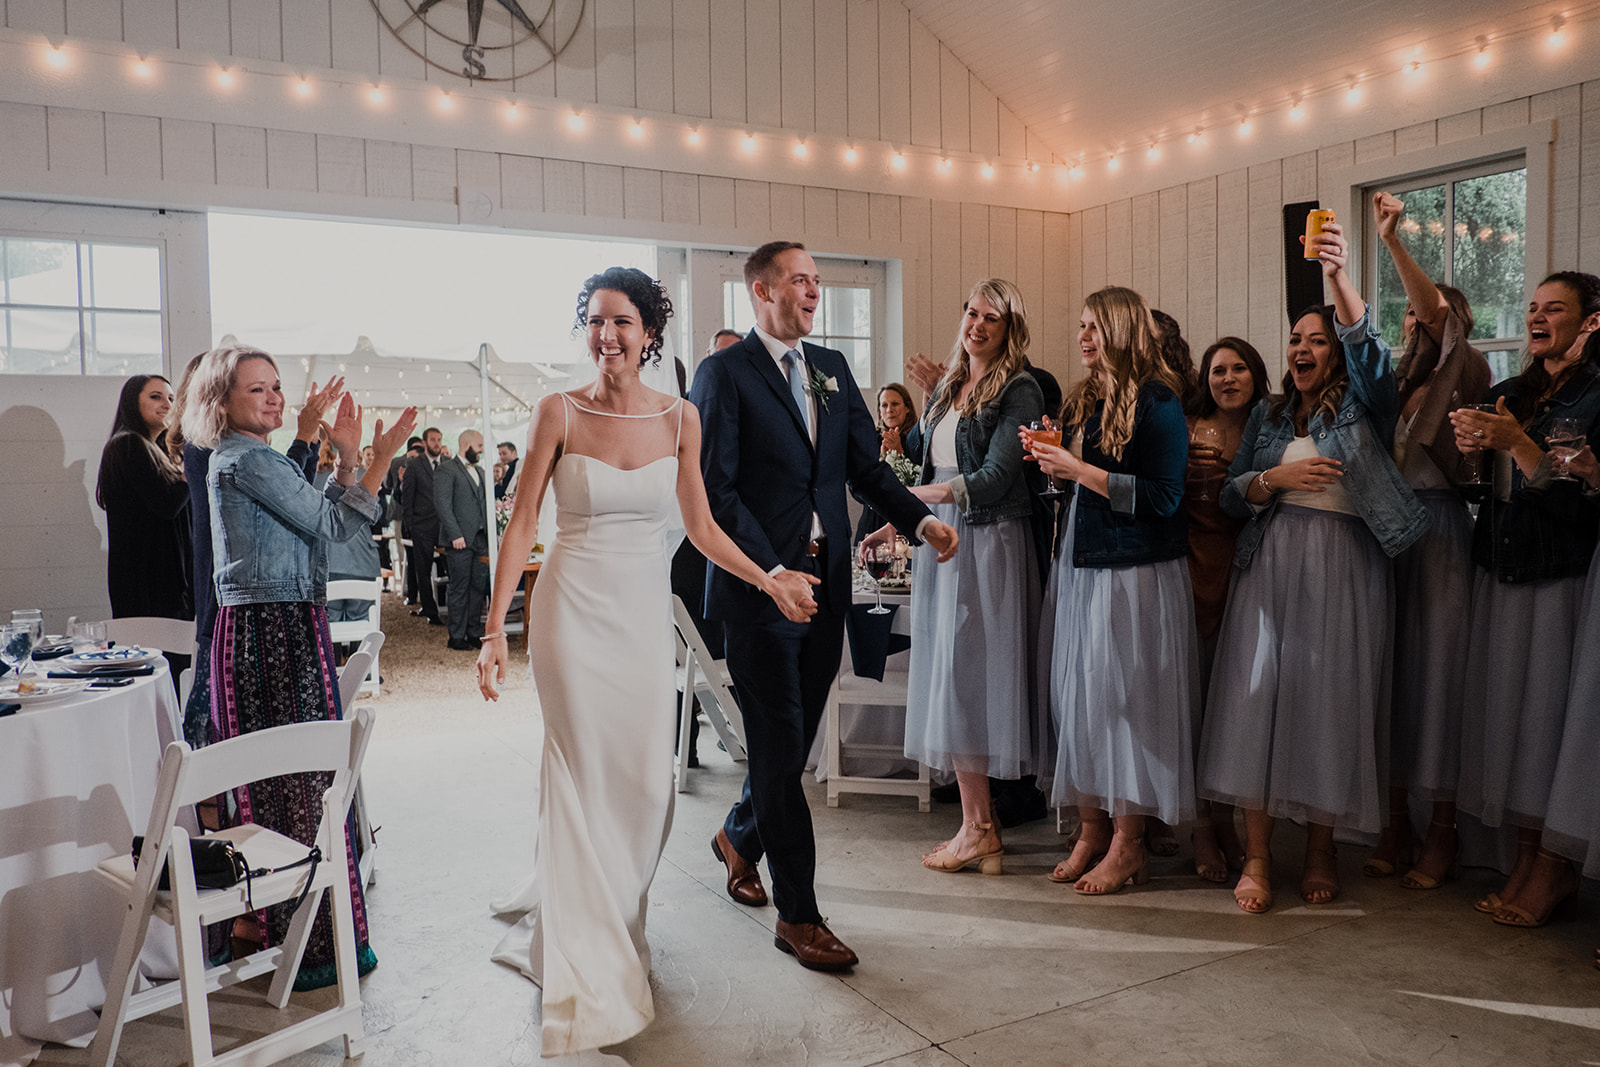 A bride and groom are applauded by guests as they walk into their wedding reception at Blue Hill Farm in Waterford, VA